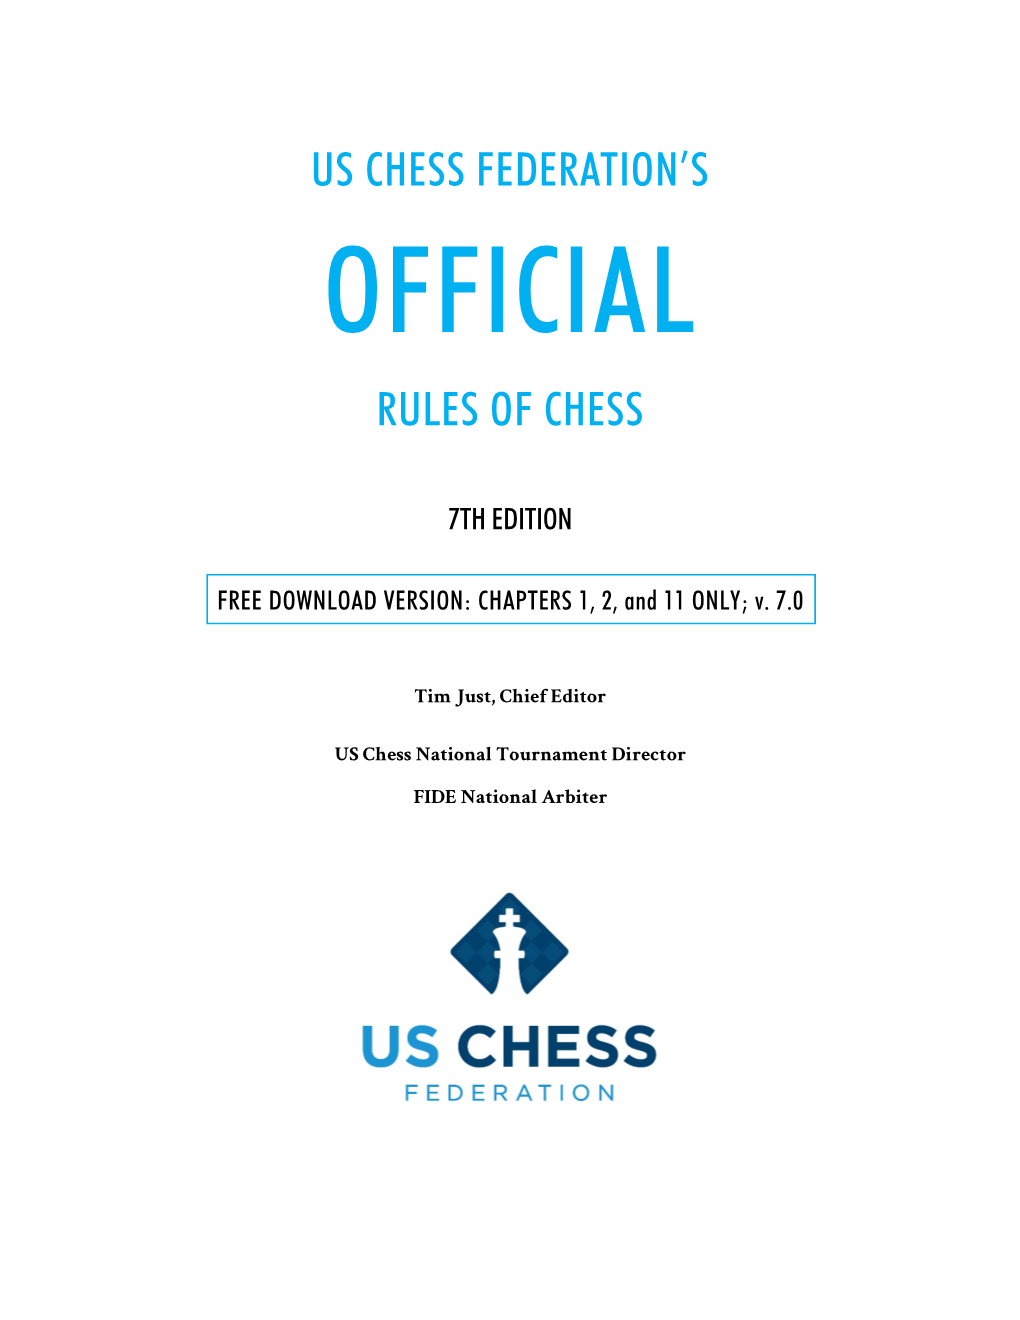 Us Chess Federation's Rules of Chess